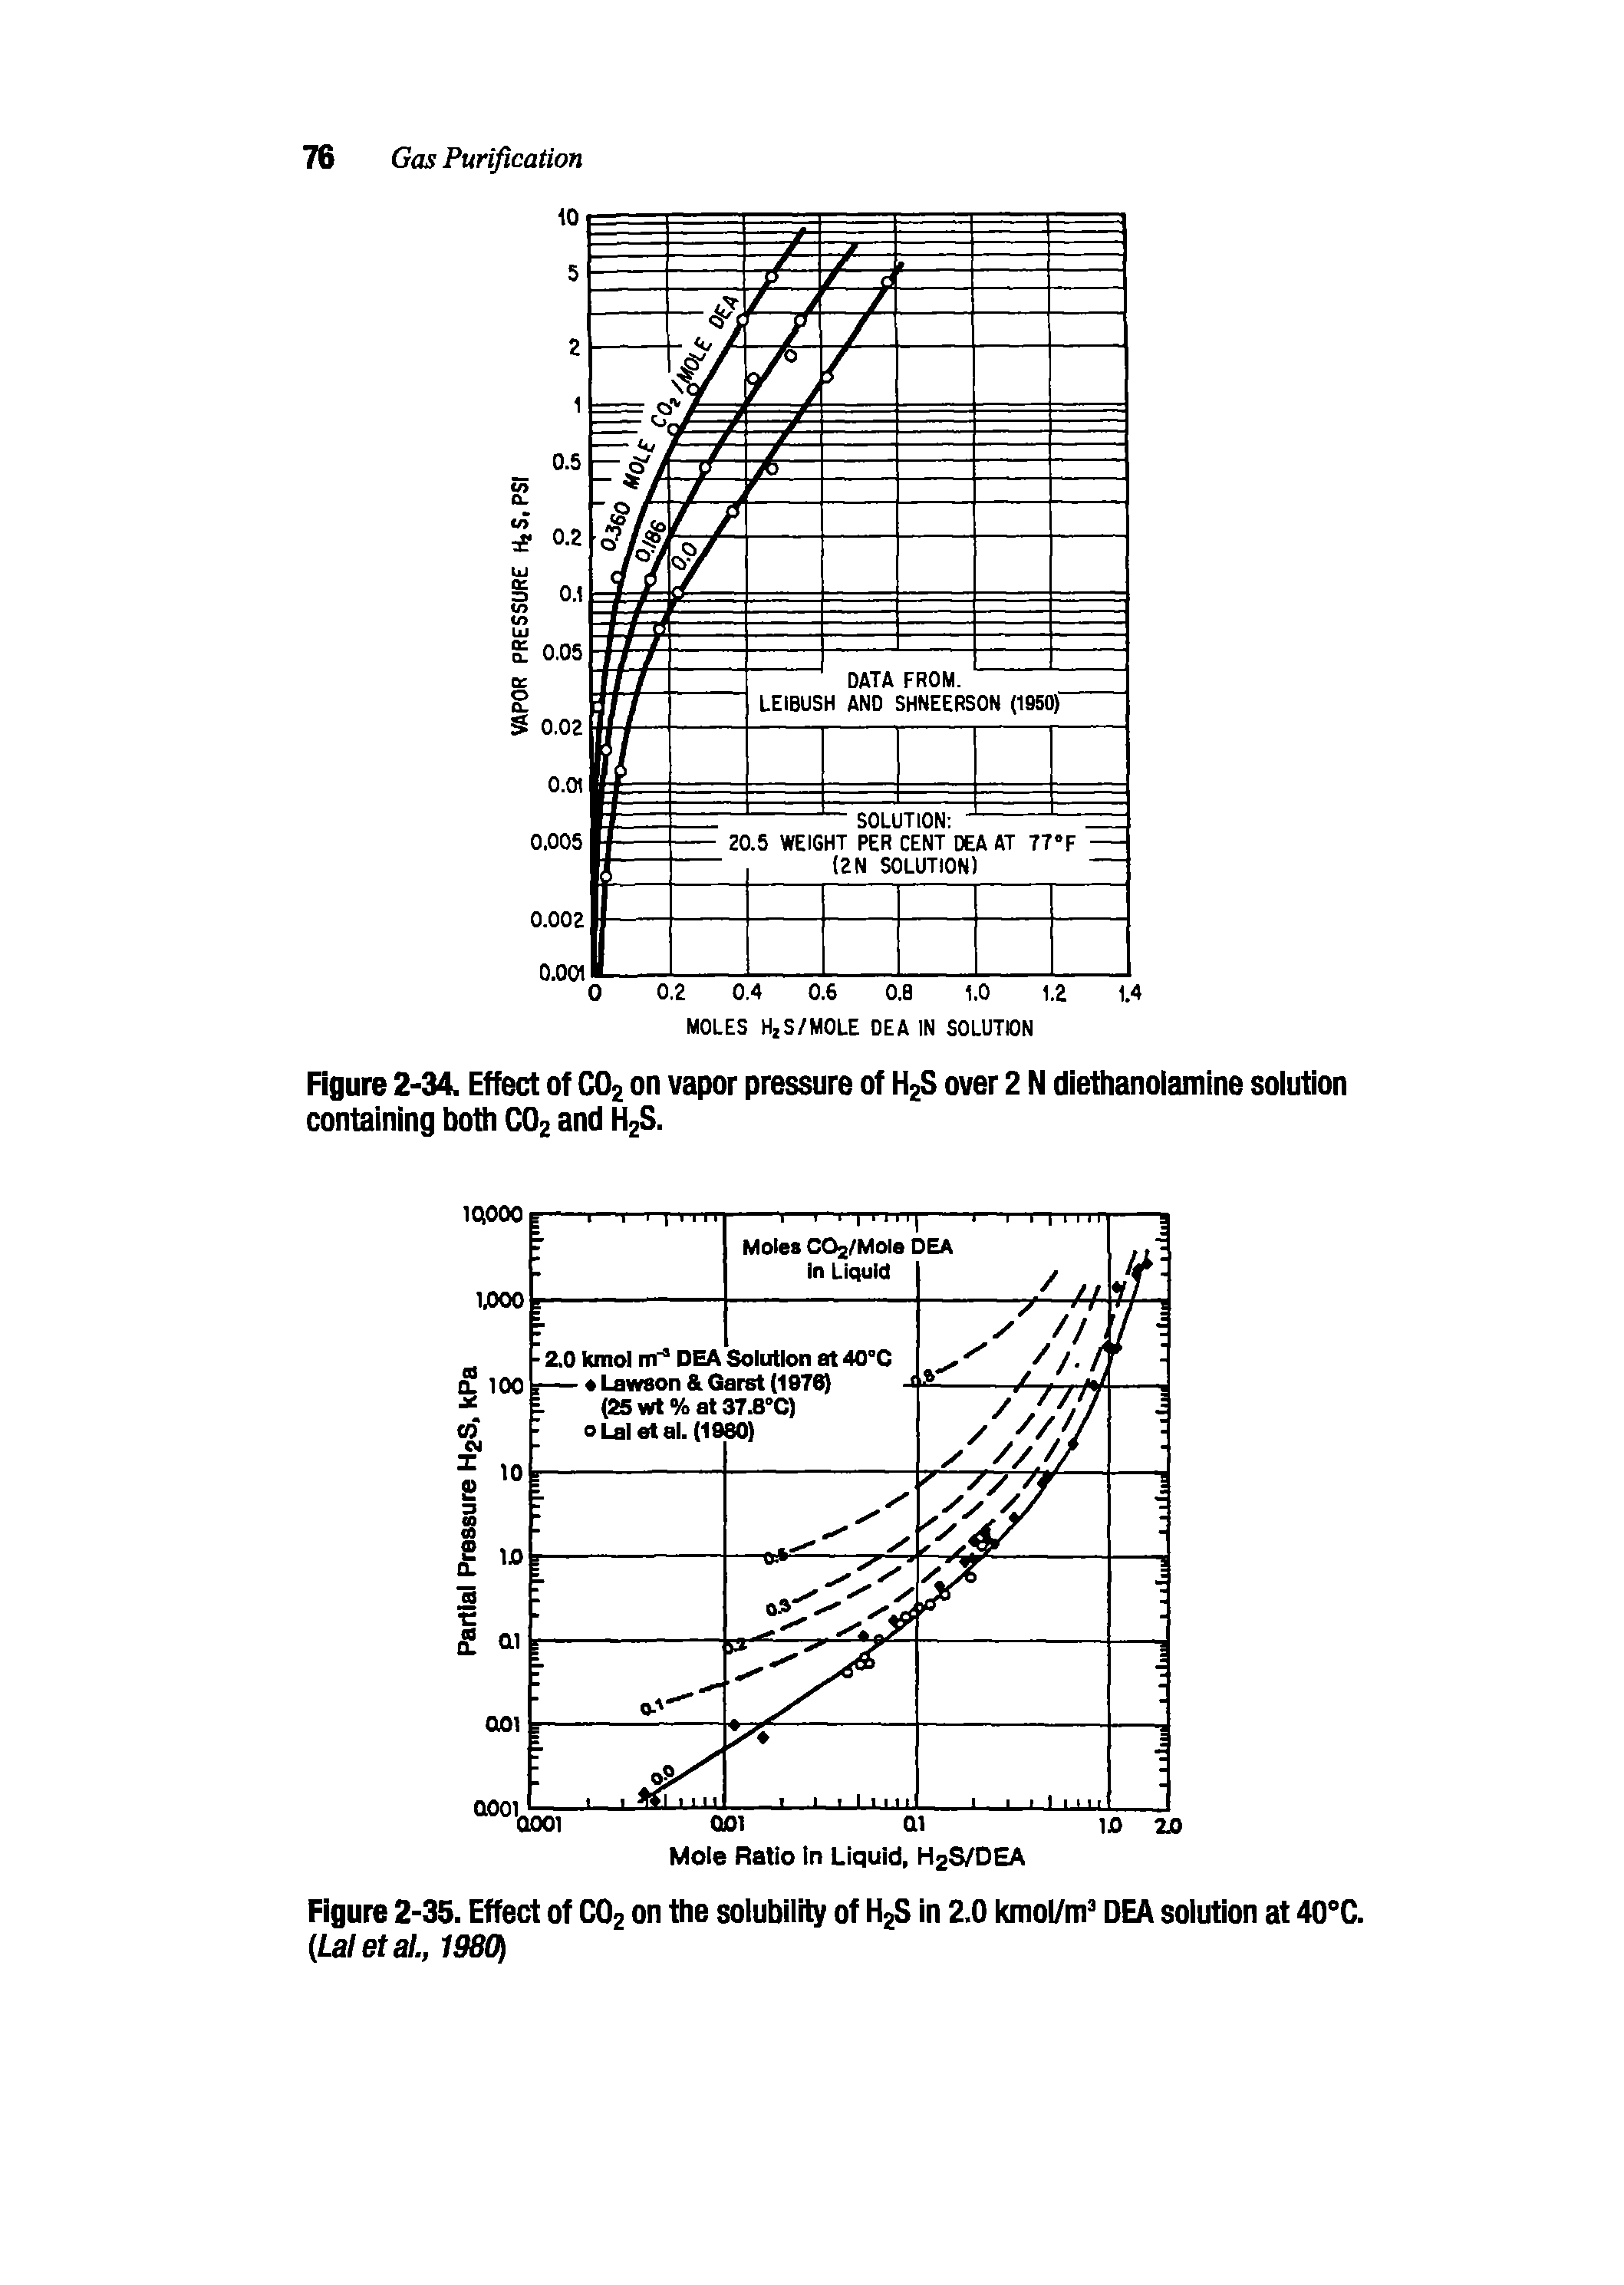 Figure 2-34. Effect of CO2 on vapor pressure of H2S over 2 N diethanolamine solution containing both CO2 and H2S.